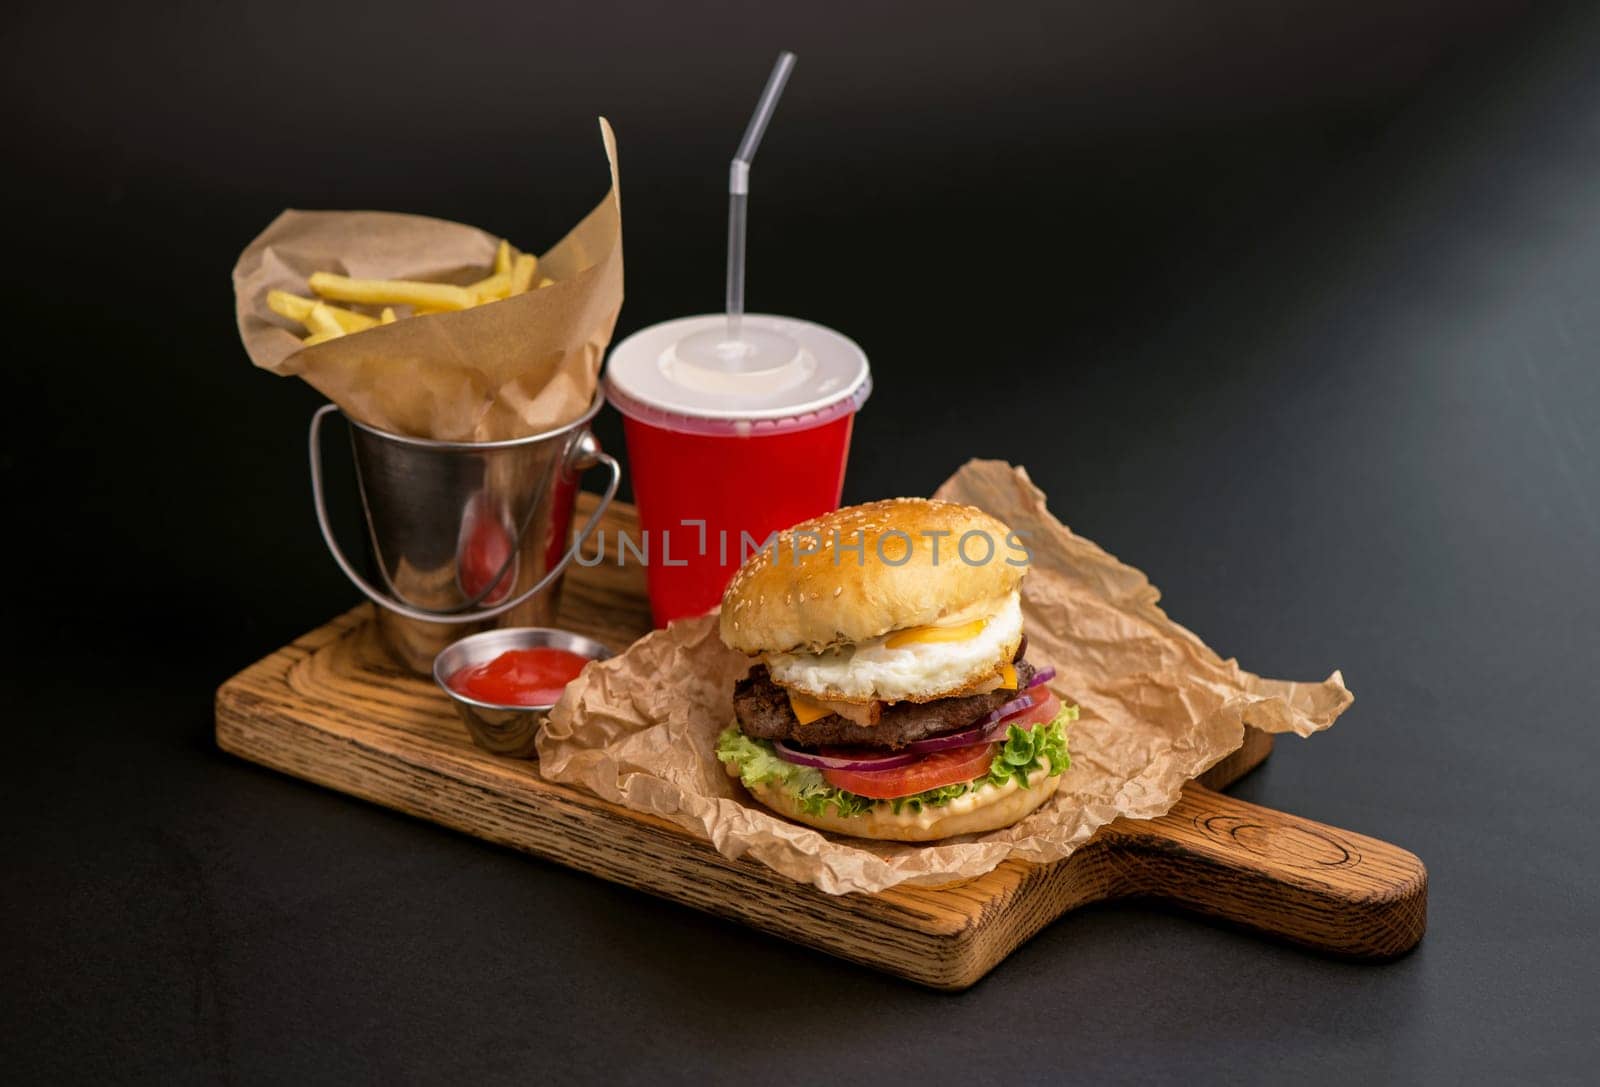 Classic burgers with becon, meat, cheese, onion, tomato and cheese and integral bun. On textured black board. Close up. Fried potatoes and glass of cola.